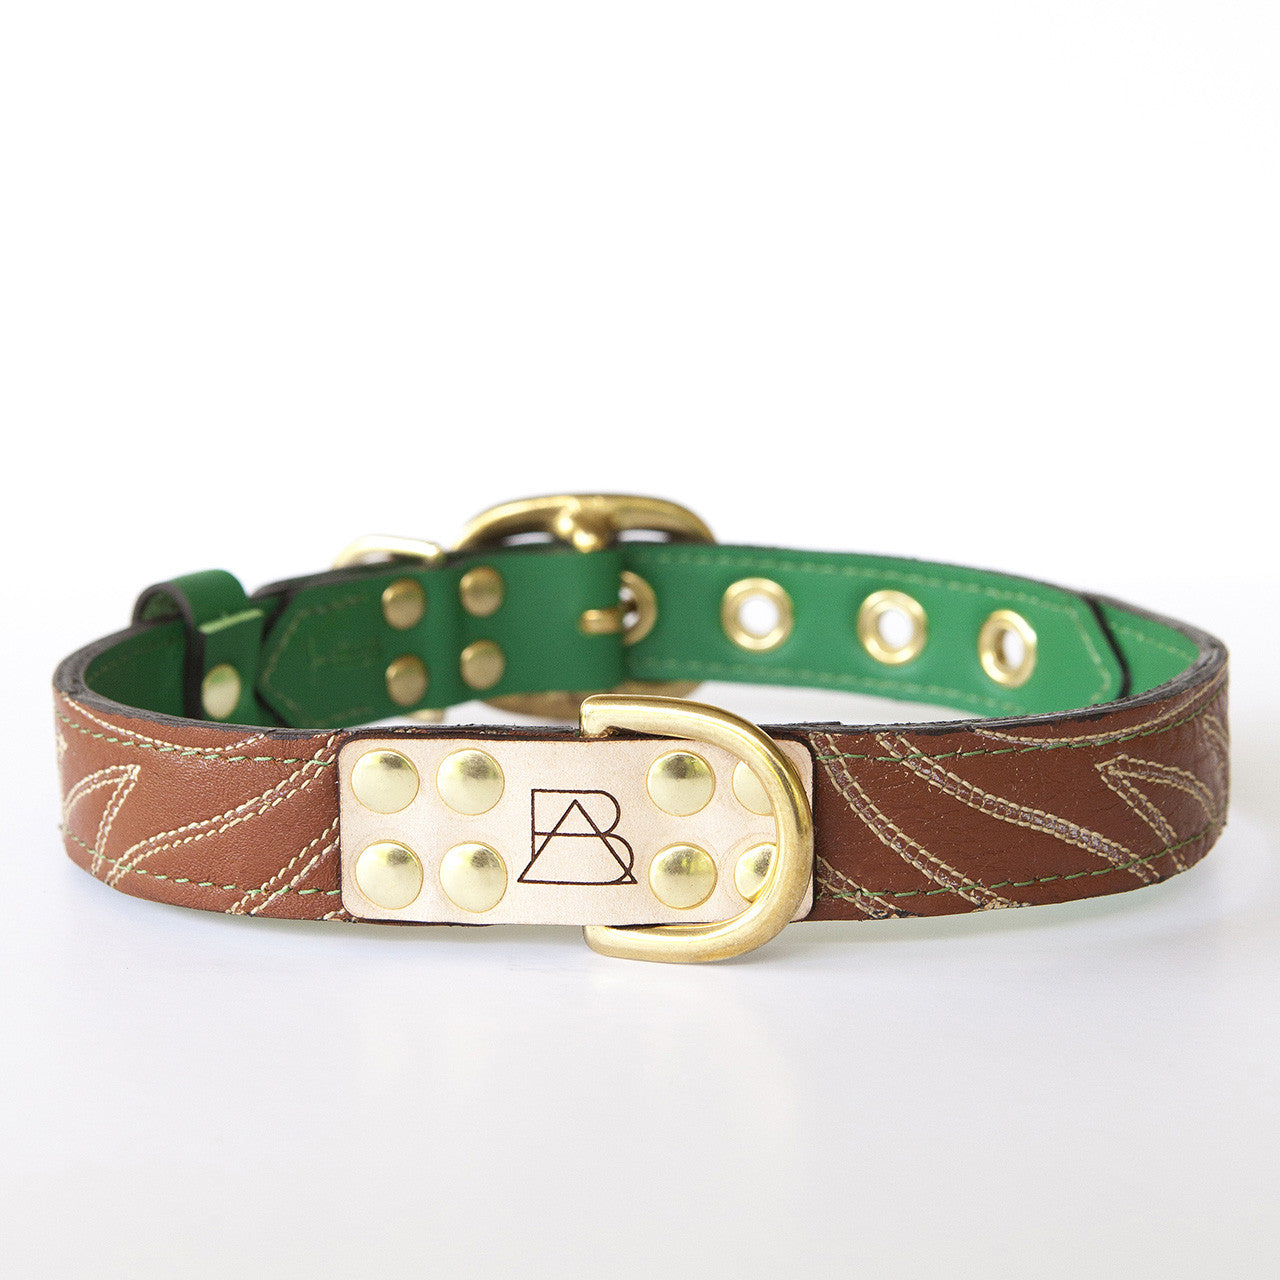 Emerald Green Dog Collar with Brown Leather + Ivory Stitching (front view)